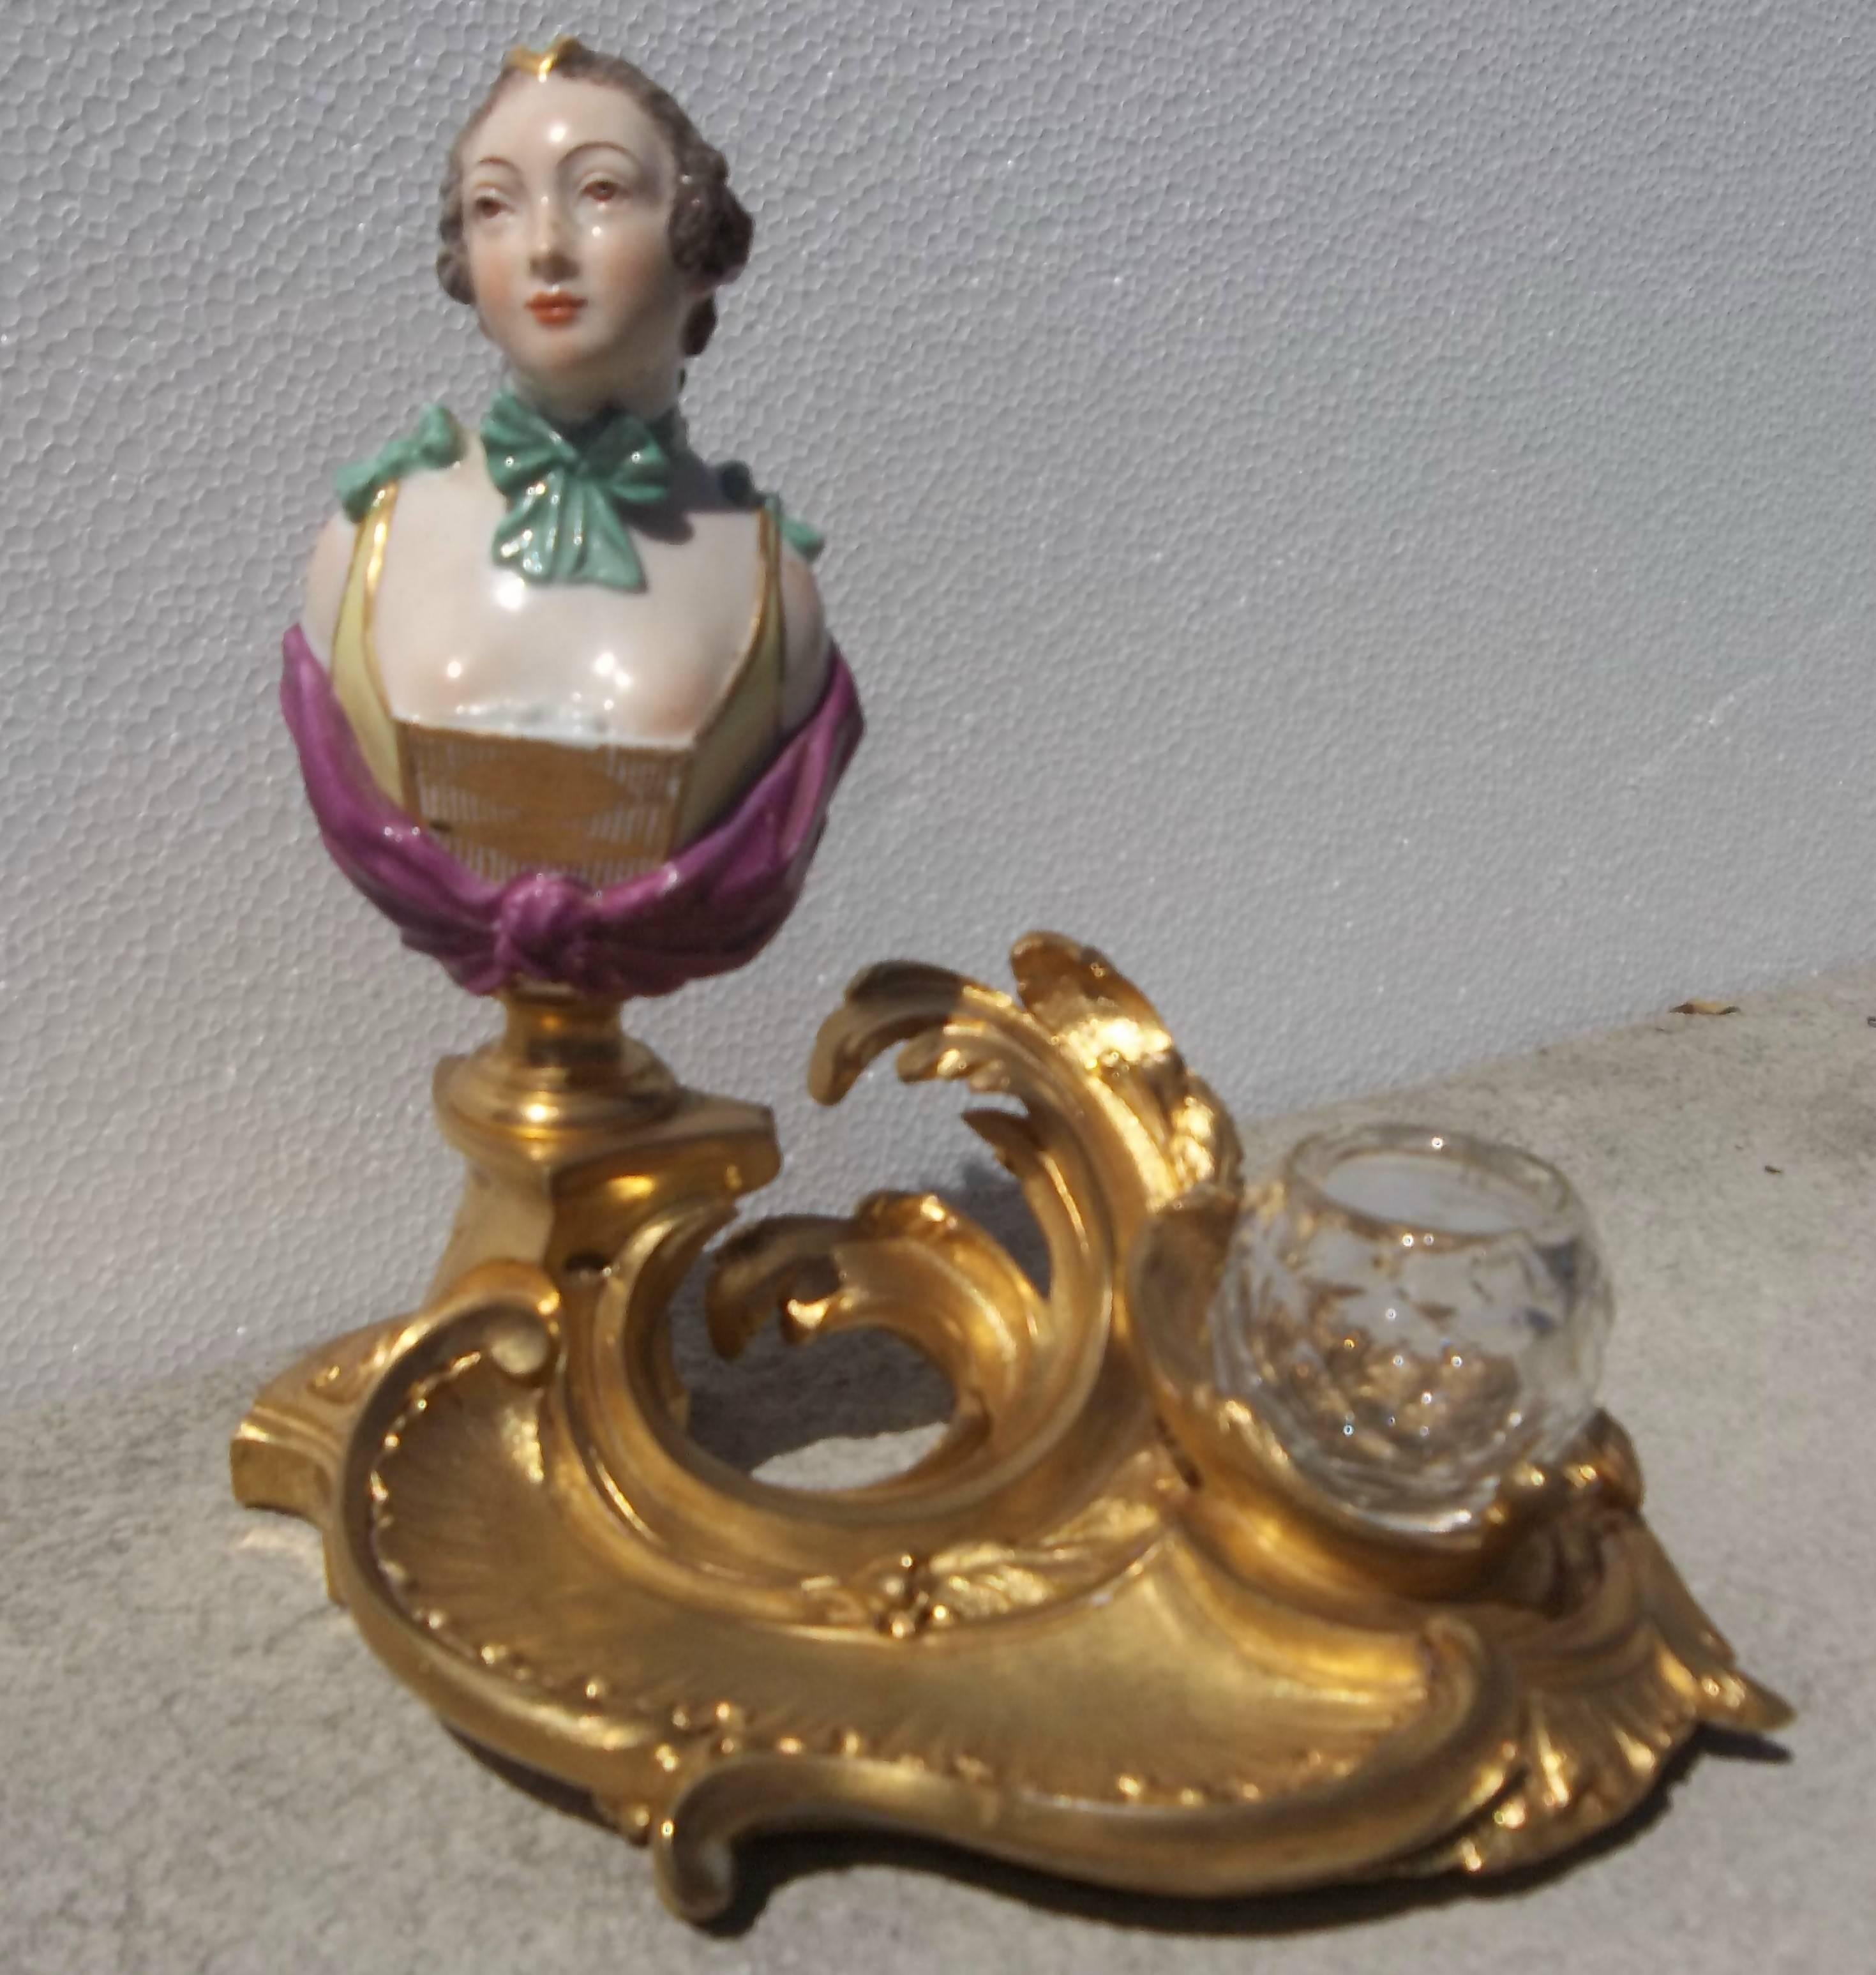 Probably Madame Pompadour ........ the ormolu base in Louis XV style. The ormolu very finely cast, crisply chased and otherwise finely detailed. The bust in good condition and well done. 

Belle Époque to Beaux Arts Period.